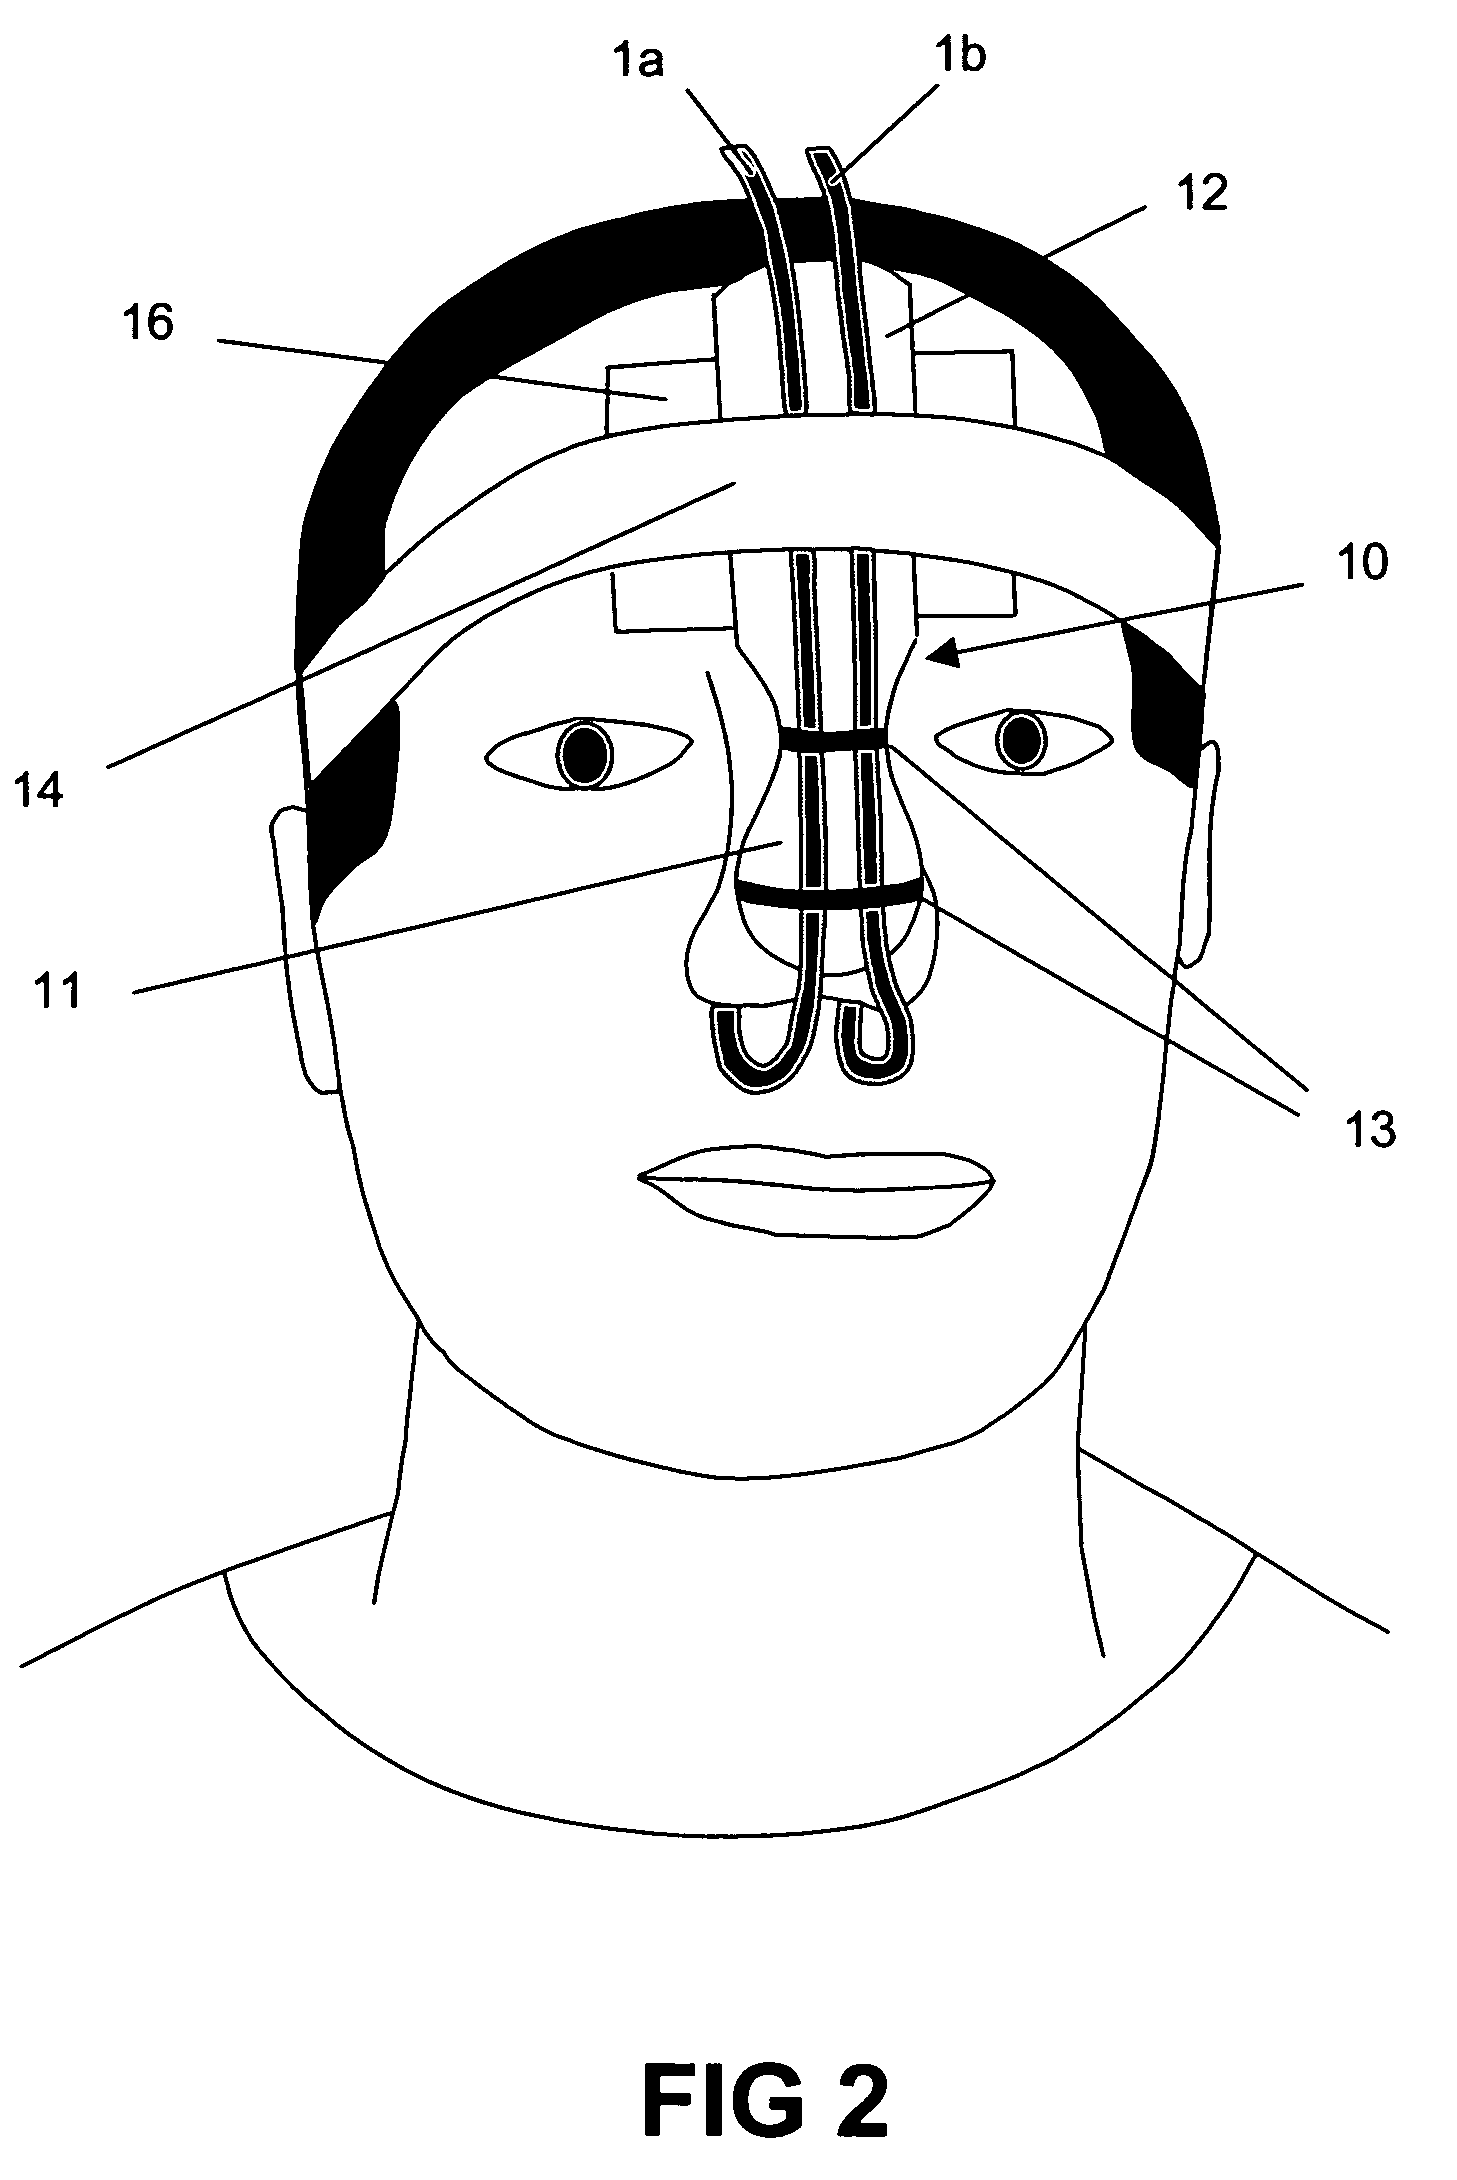 Apparatus for holding nasal tubes